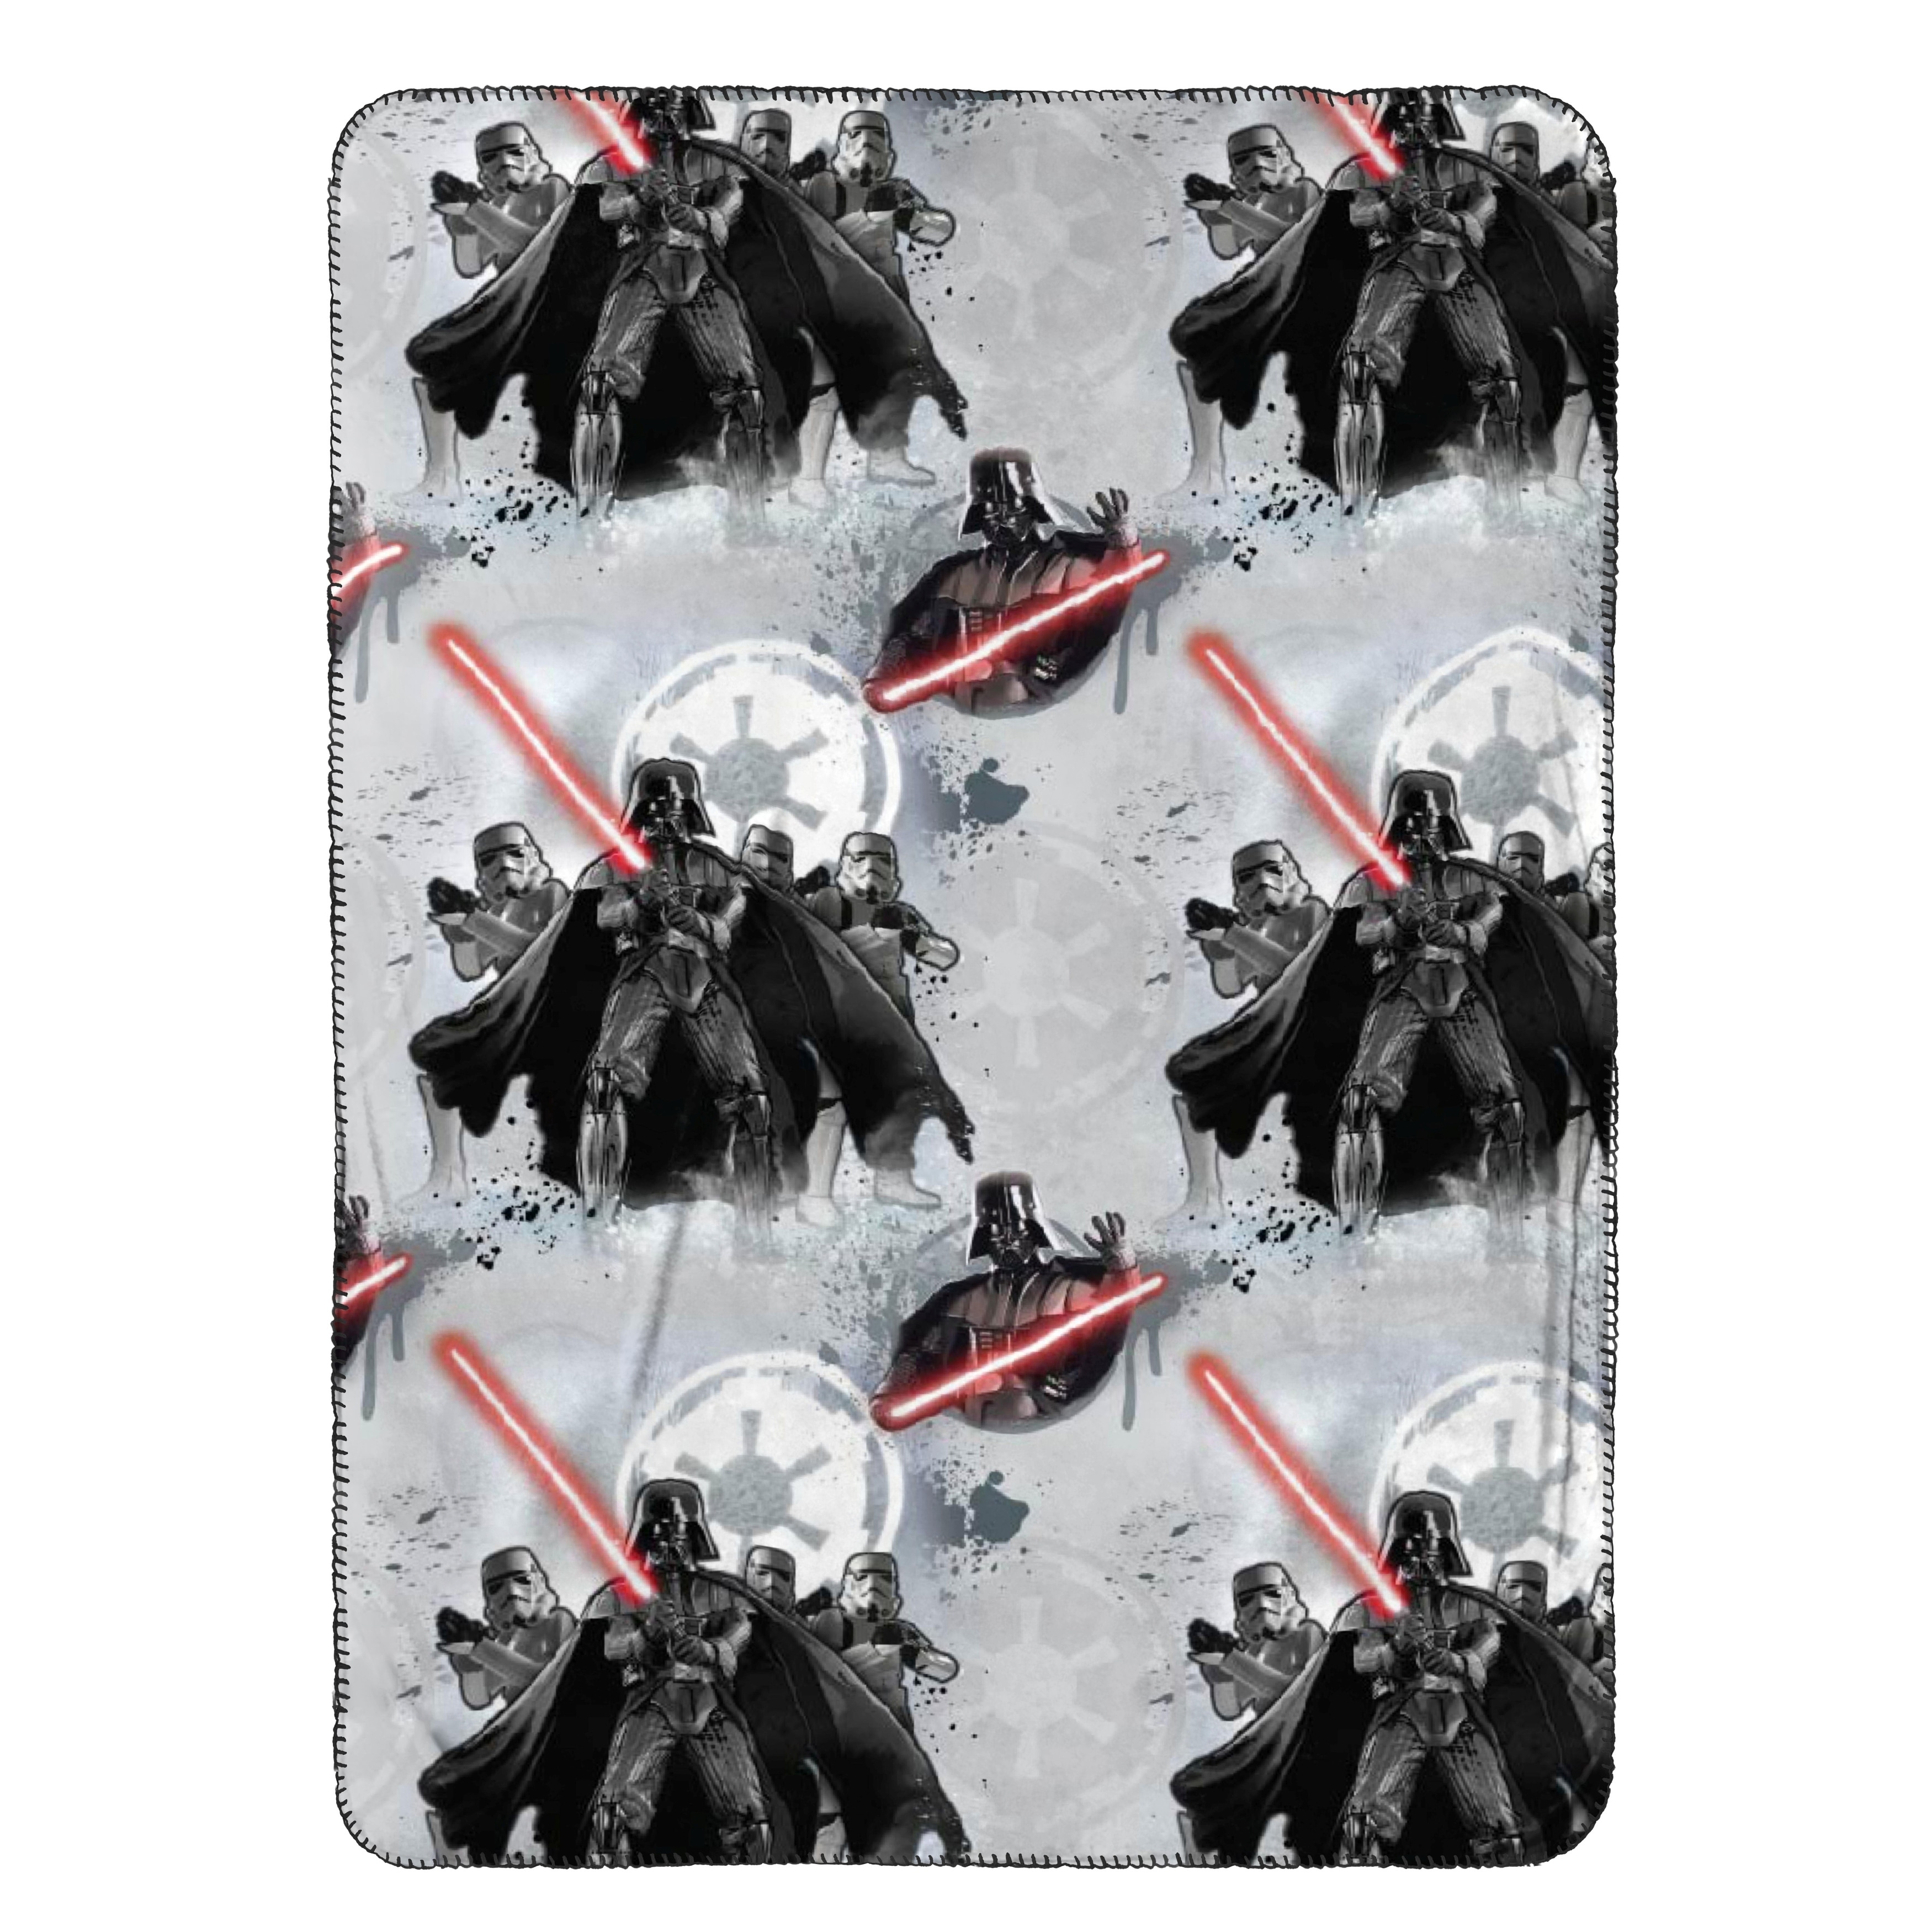 Star Wars Darth Vader Nogginz Character Pillow with 40 x 50 Travel Blanket Gift Set